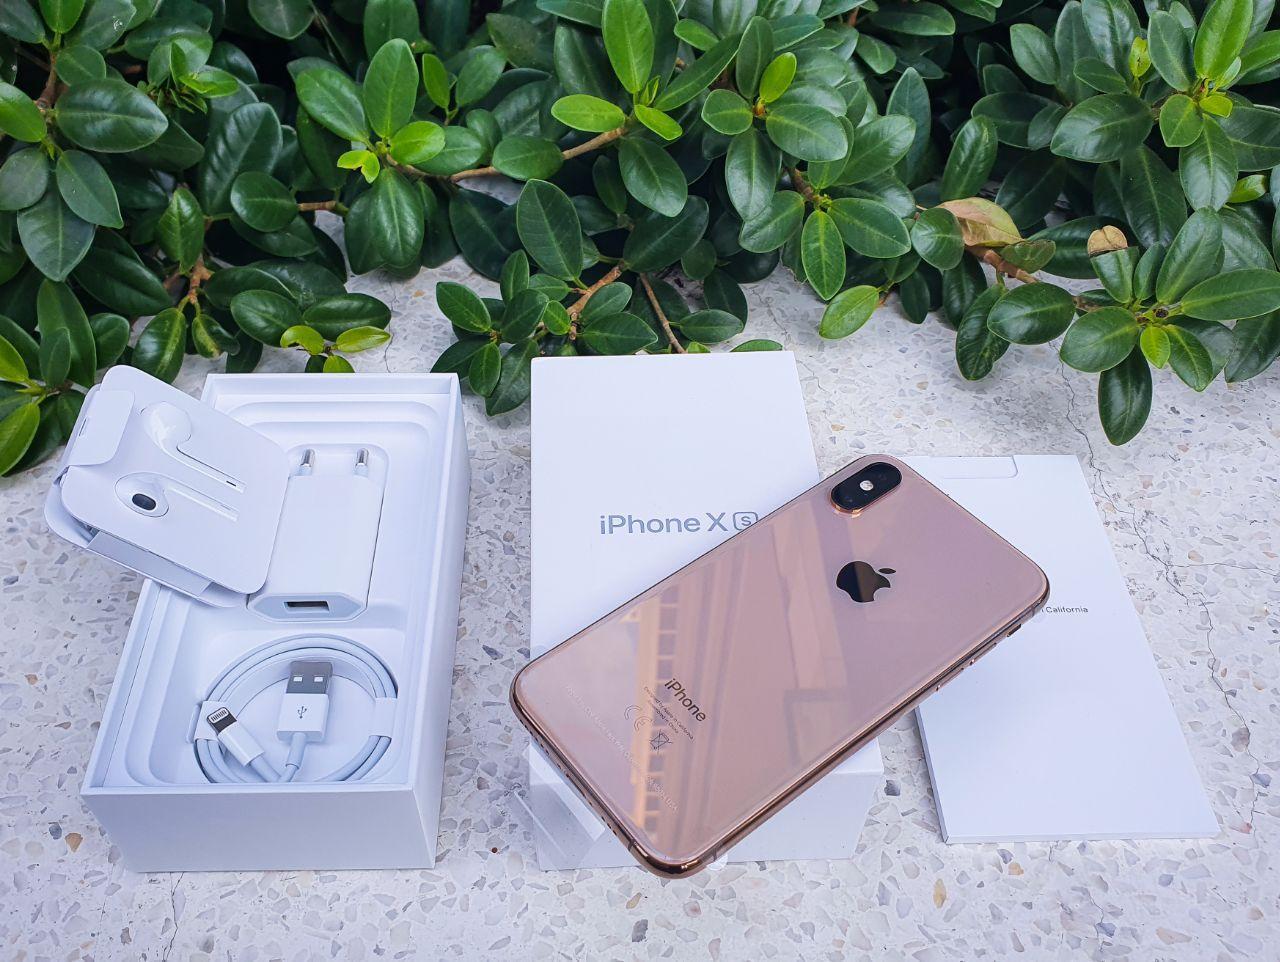 Price list of iPhone, iPad in April_ iPhone 11 is 8.9 million, XS Max is 8 million, 11 Pro Max and iPad Pro M1 are very good prices!  - Photo 3.